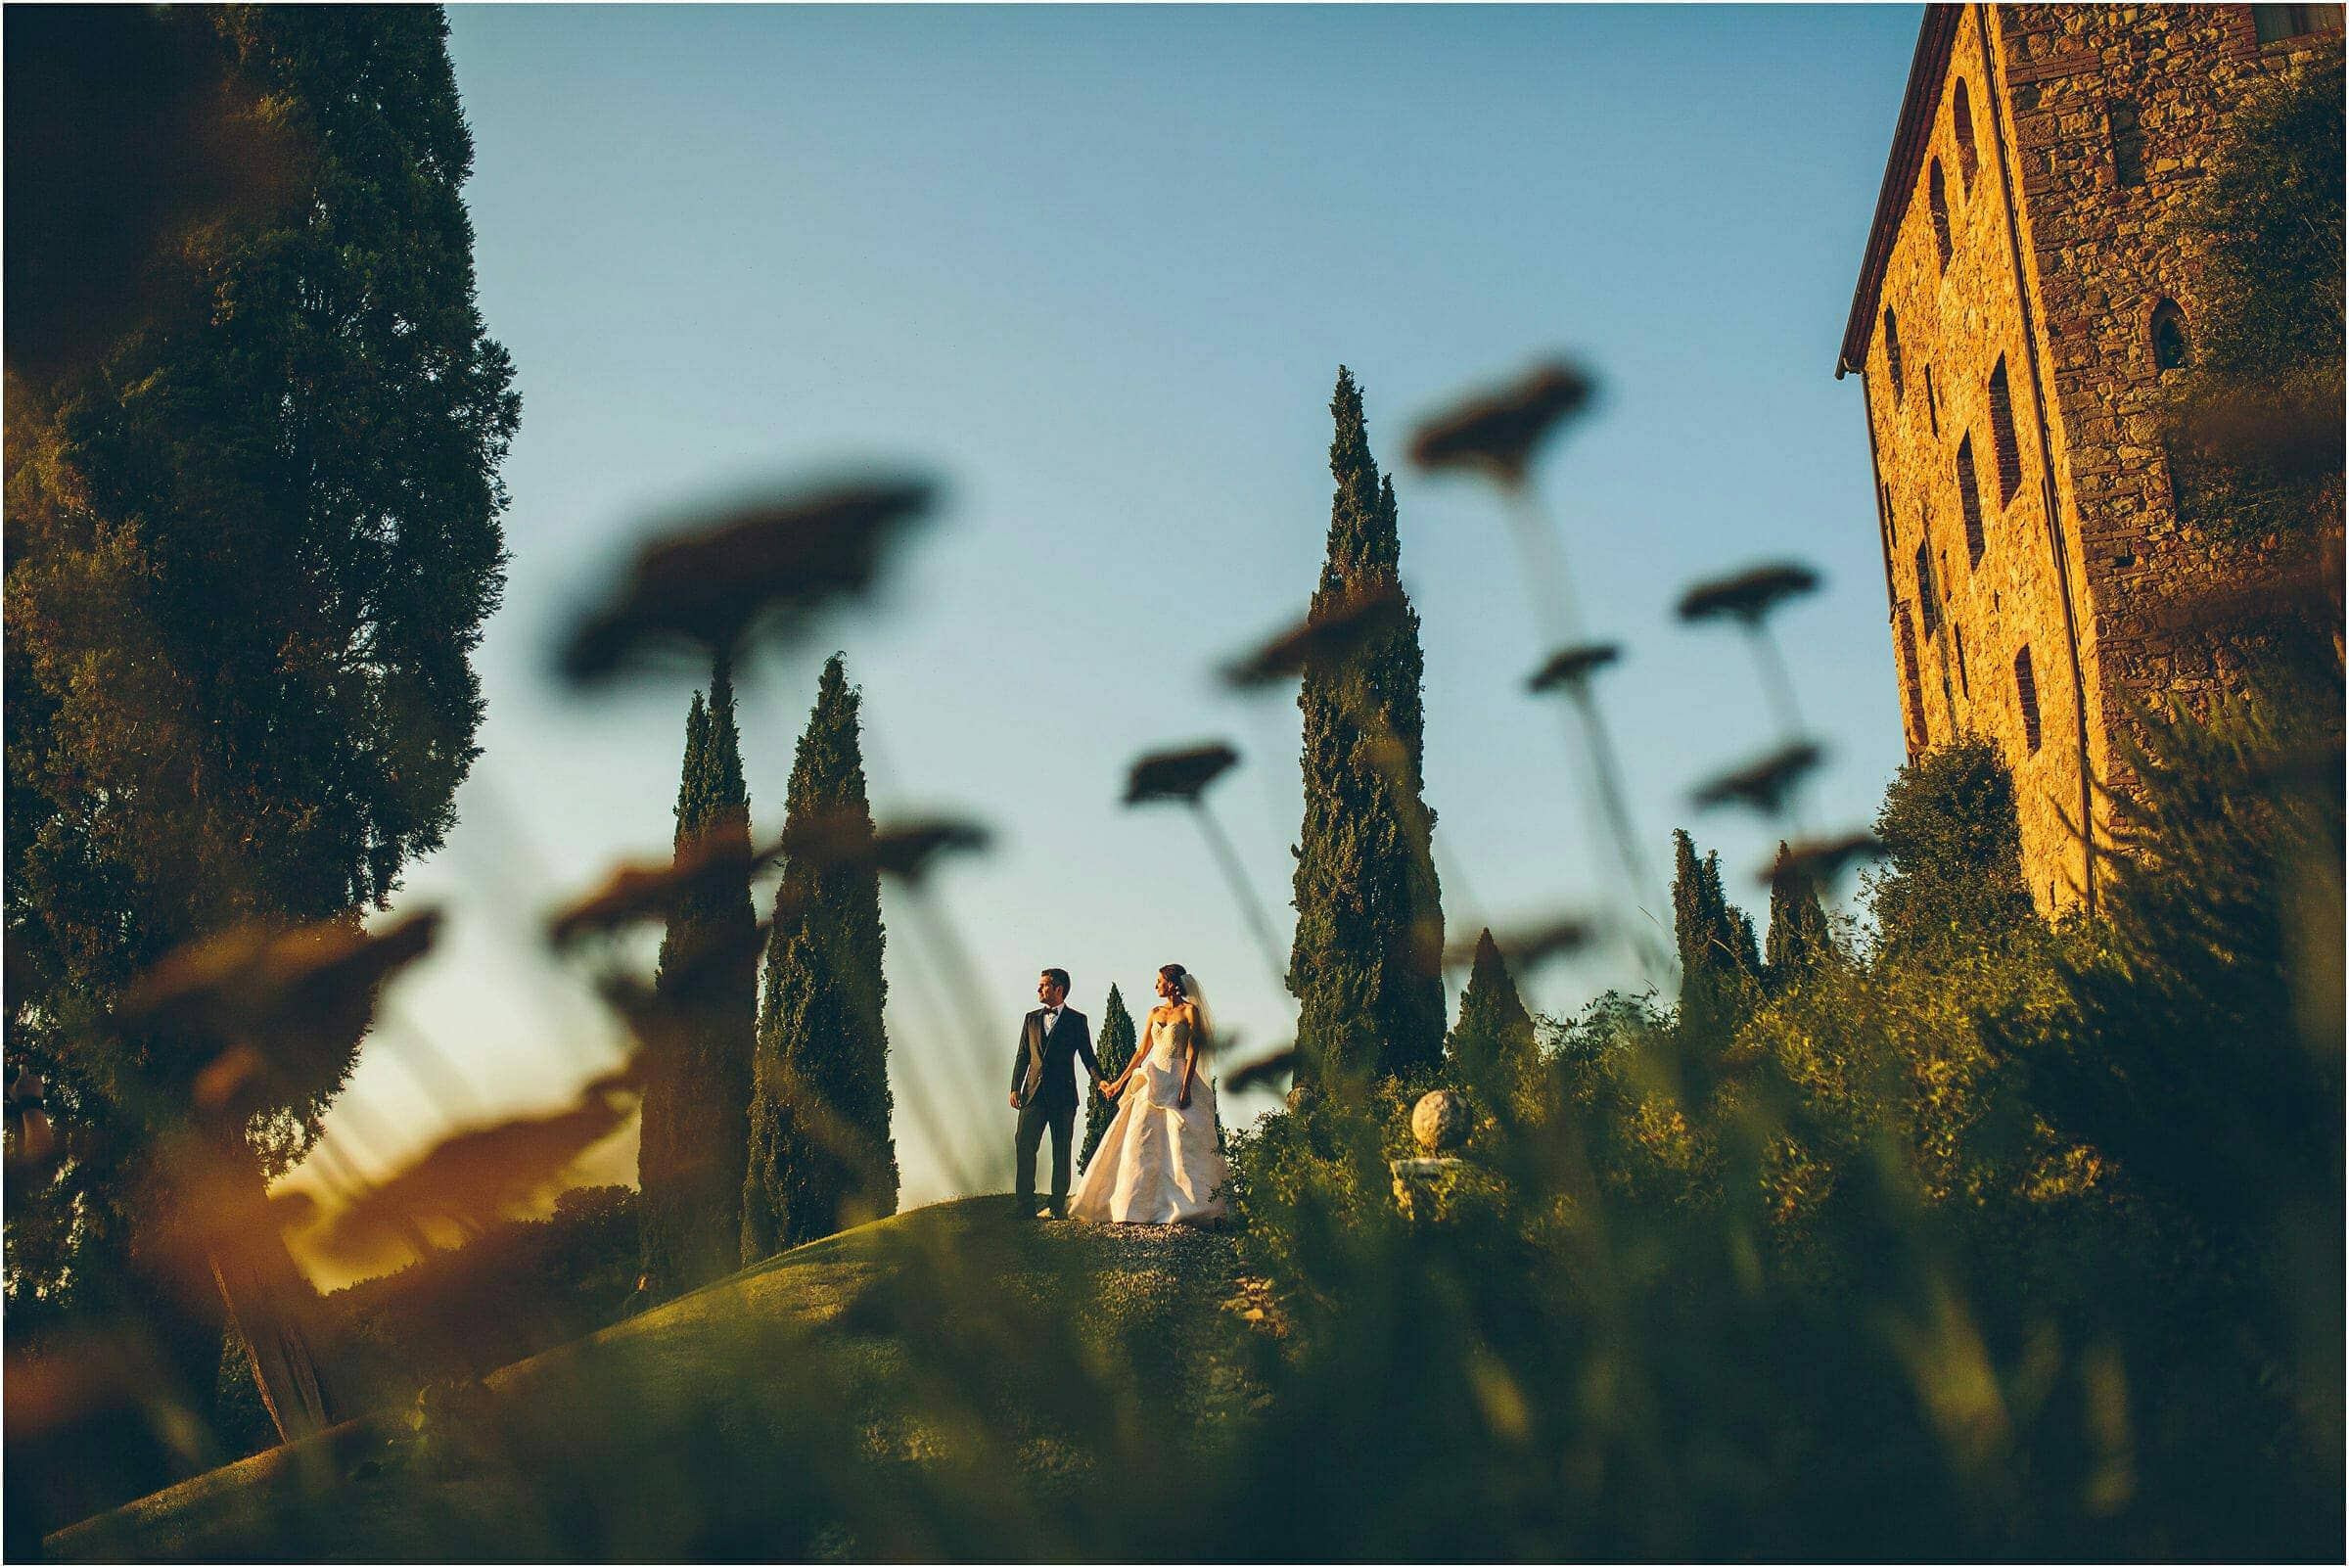 The bride and groom outside Castello di Vicarello on their destination wedding photographed through the plants in the sunset